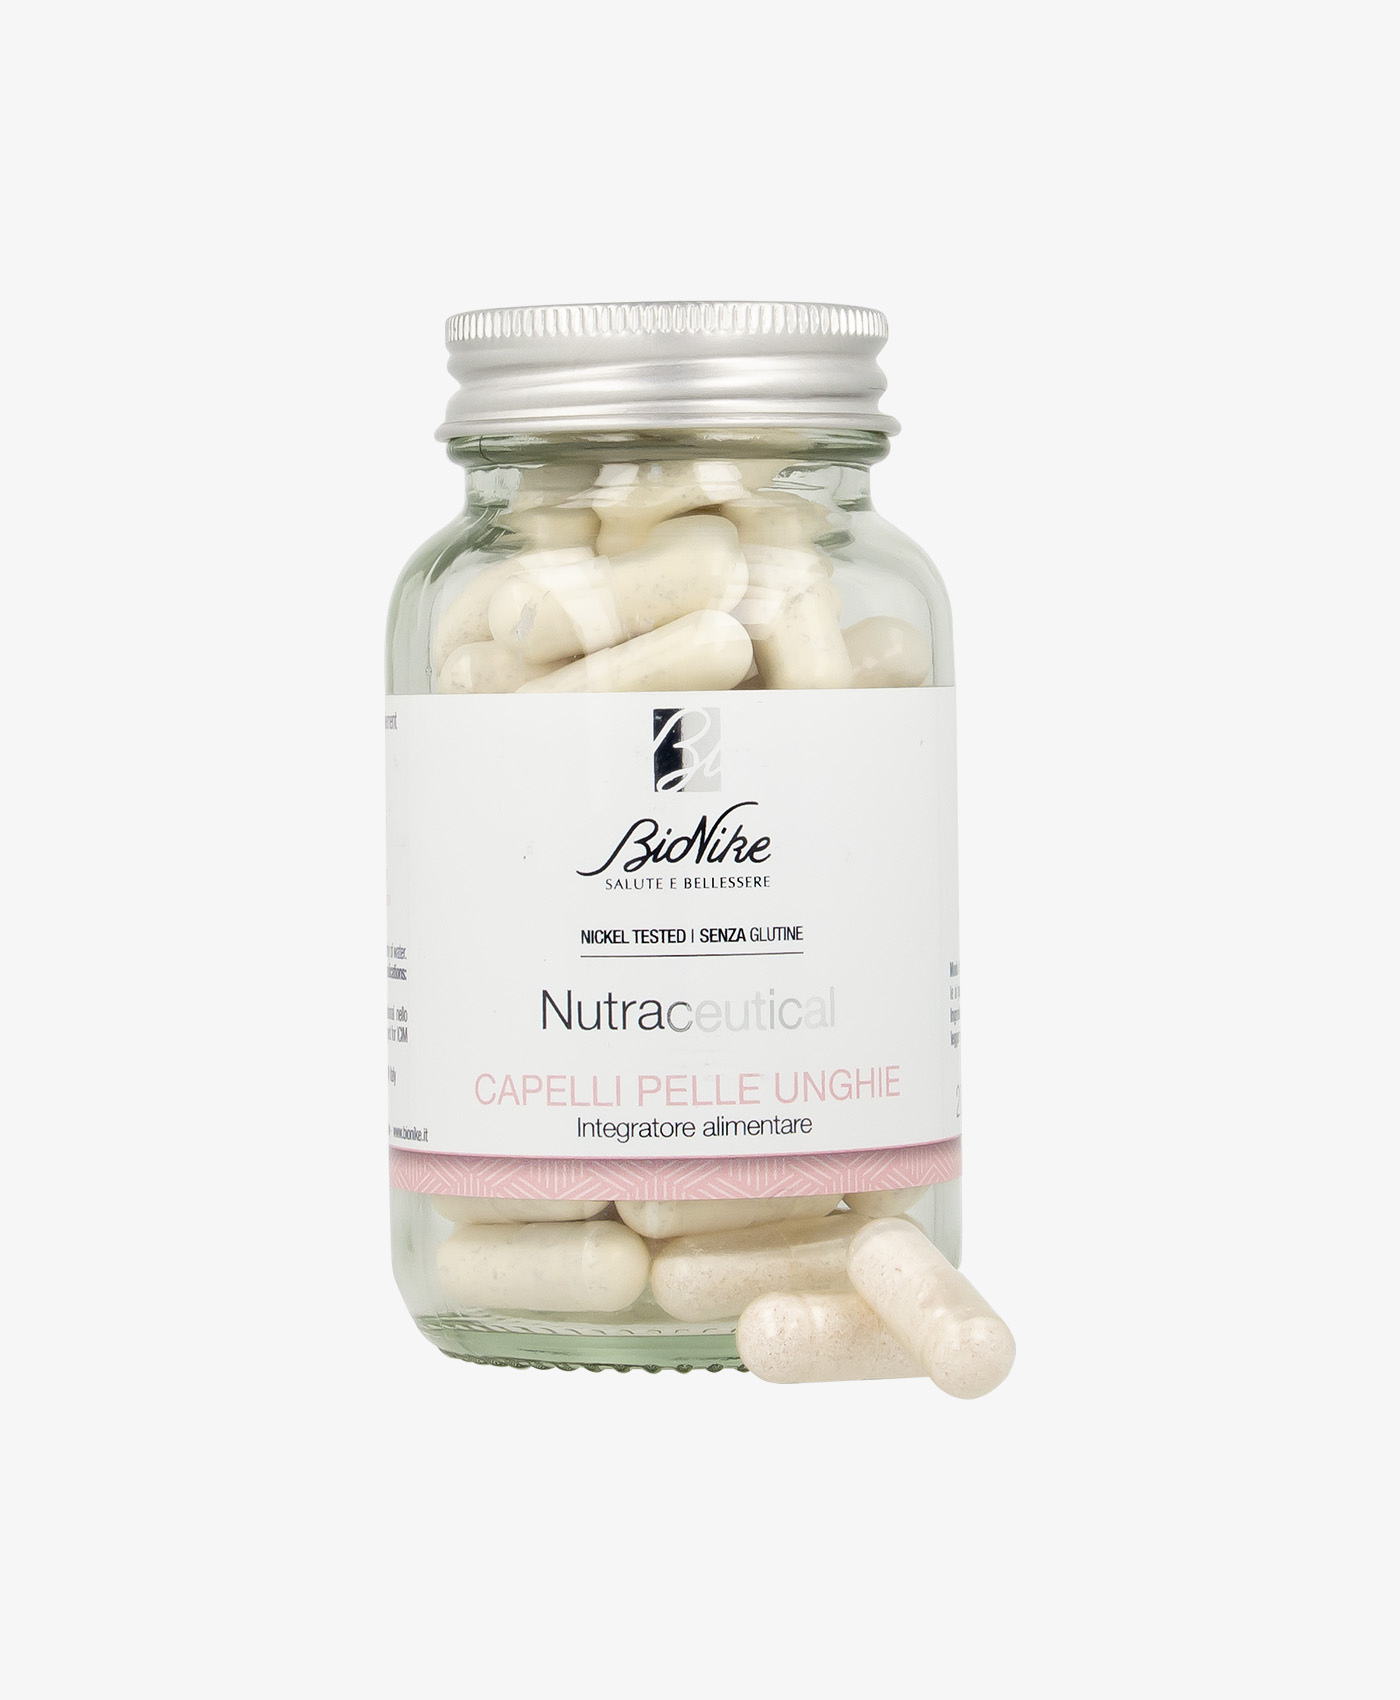 Hair Skin Nails Food Supplement - BioNike - Sito Ufficiale